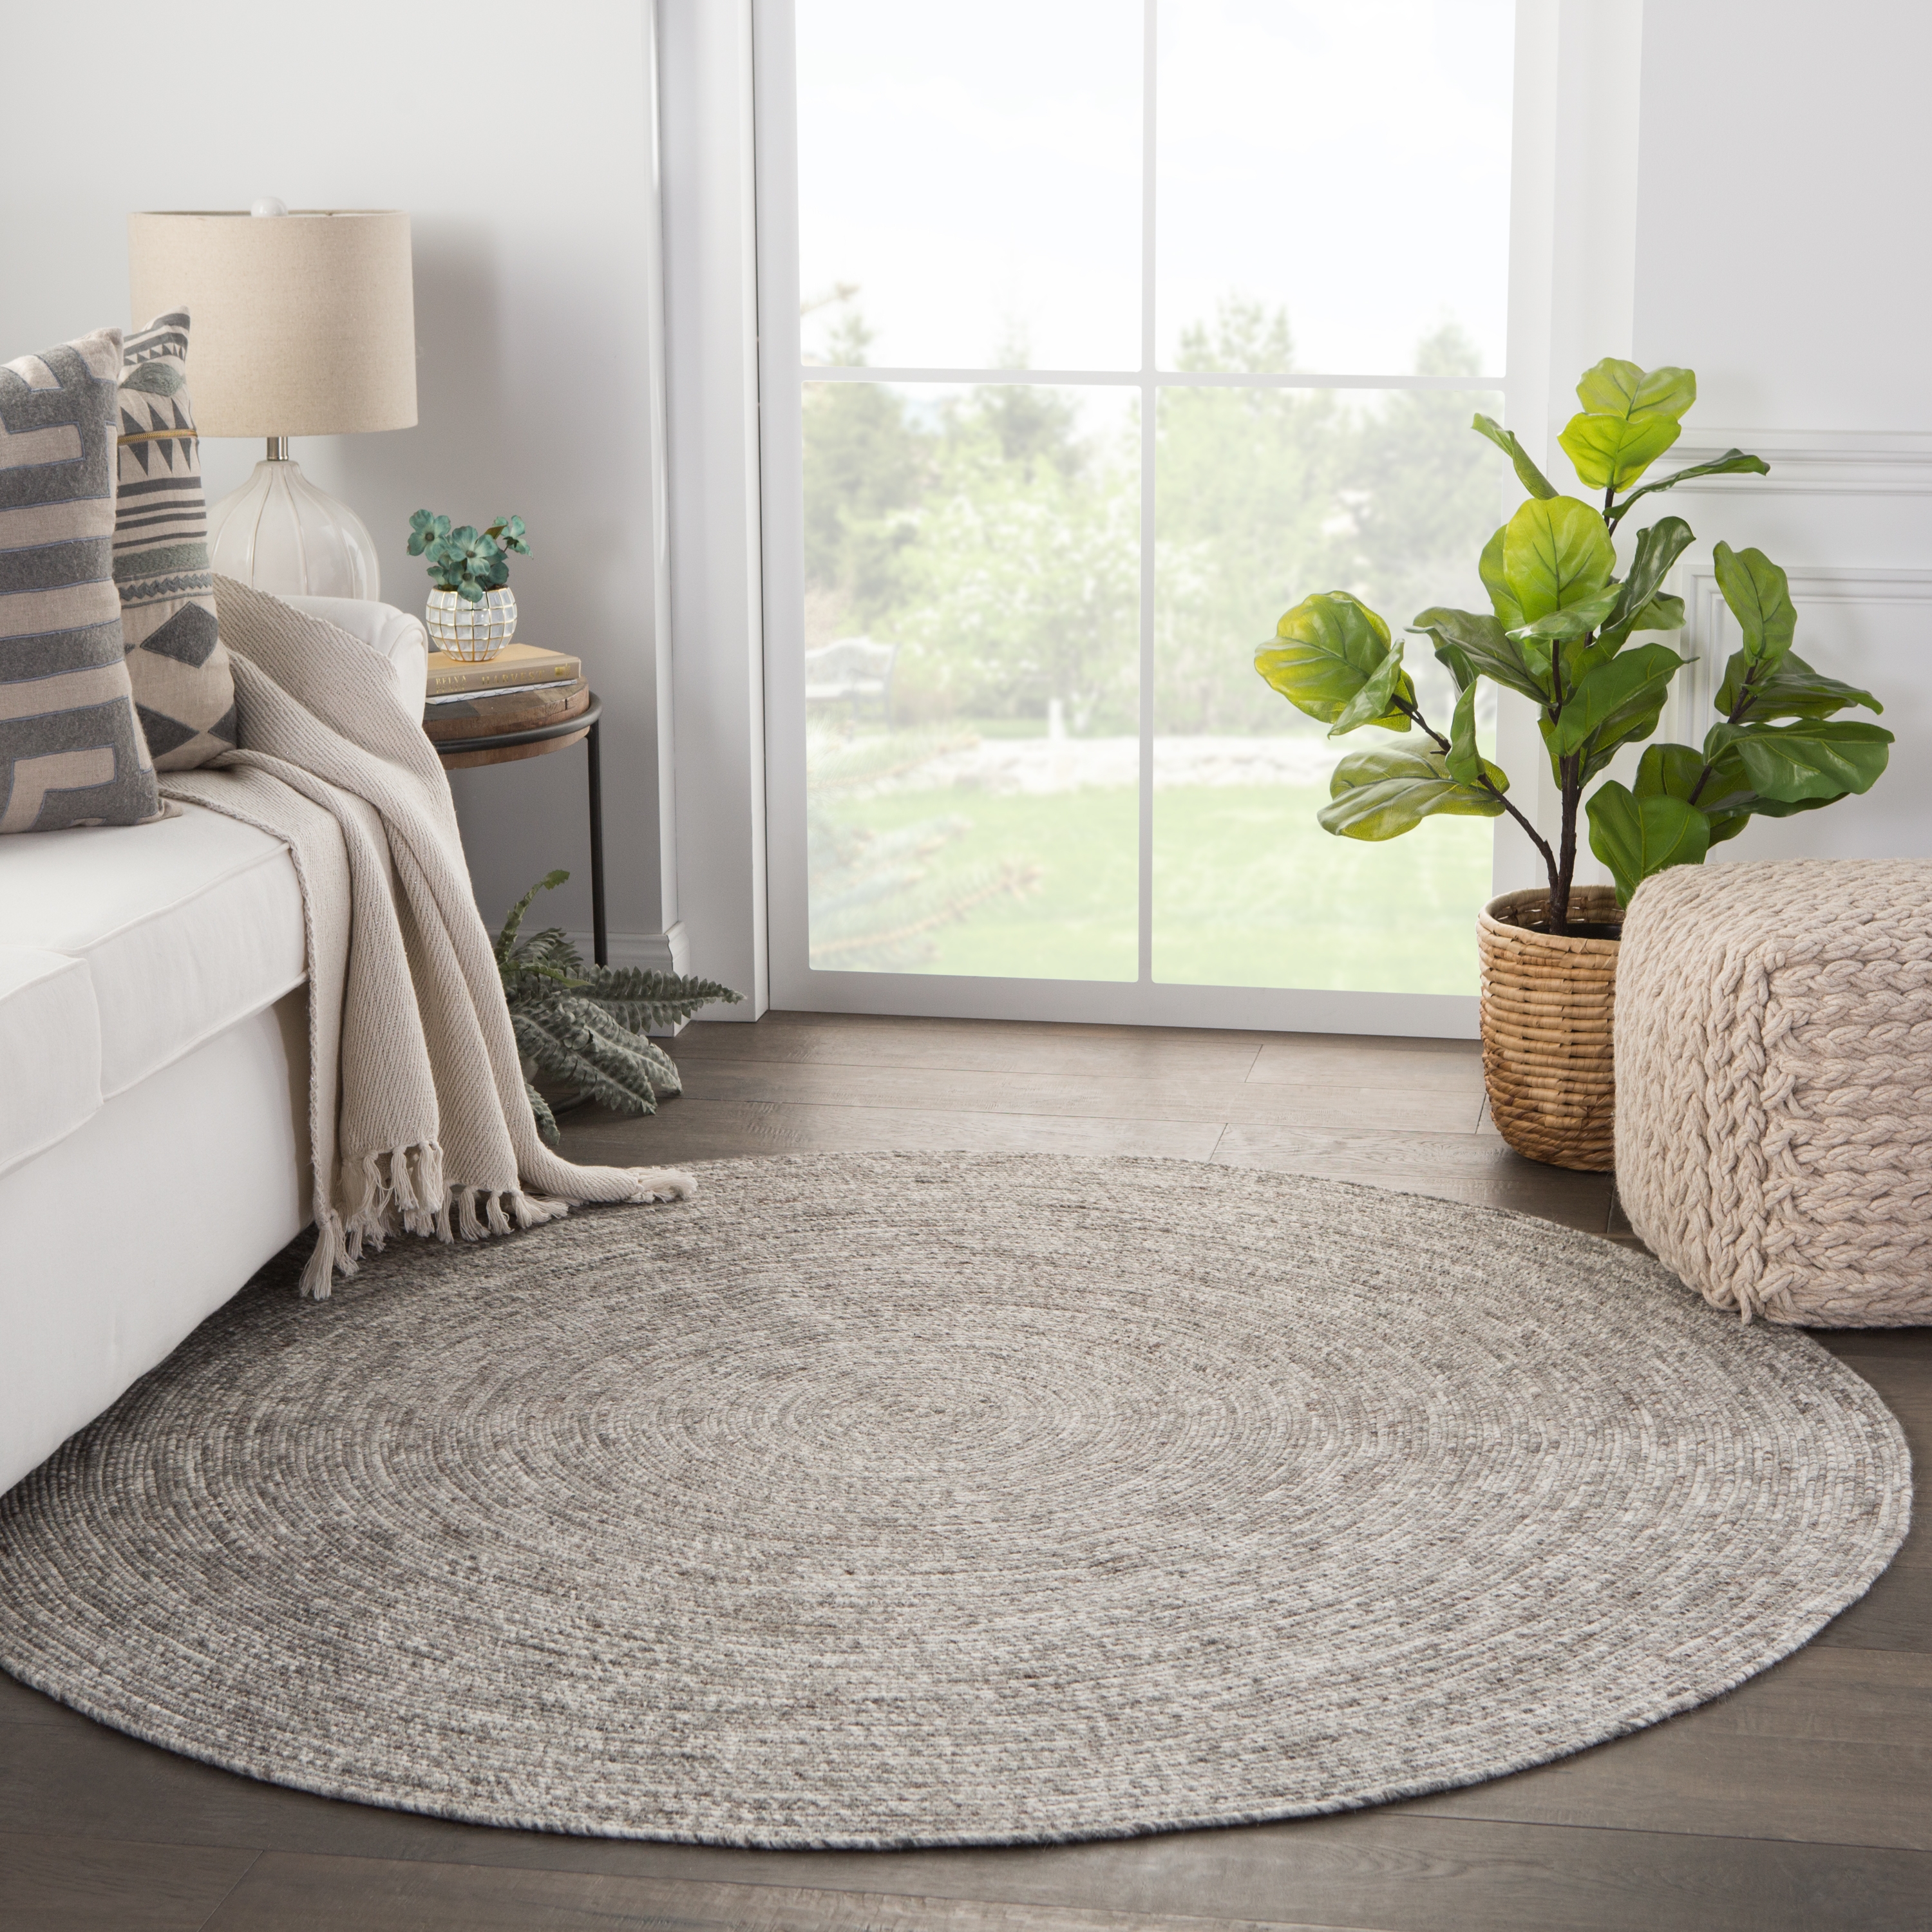 Tenby Natural Solid Gray/ White Round Area Rug (8'X8') - Image 3